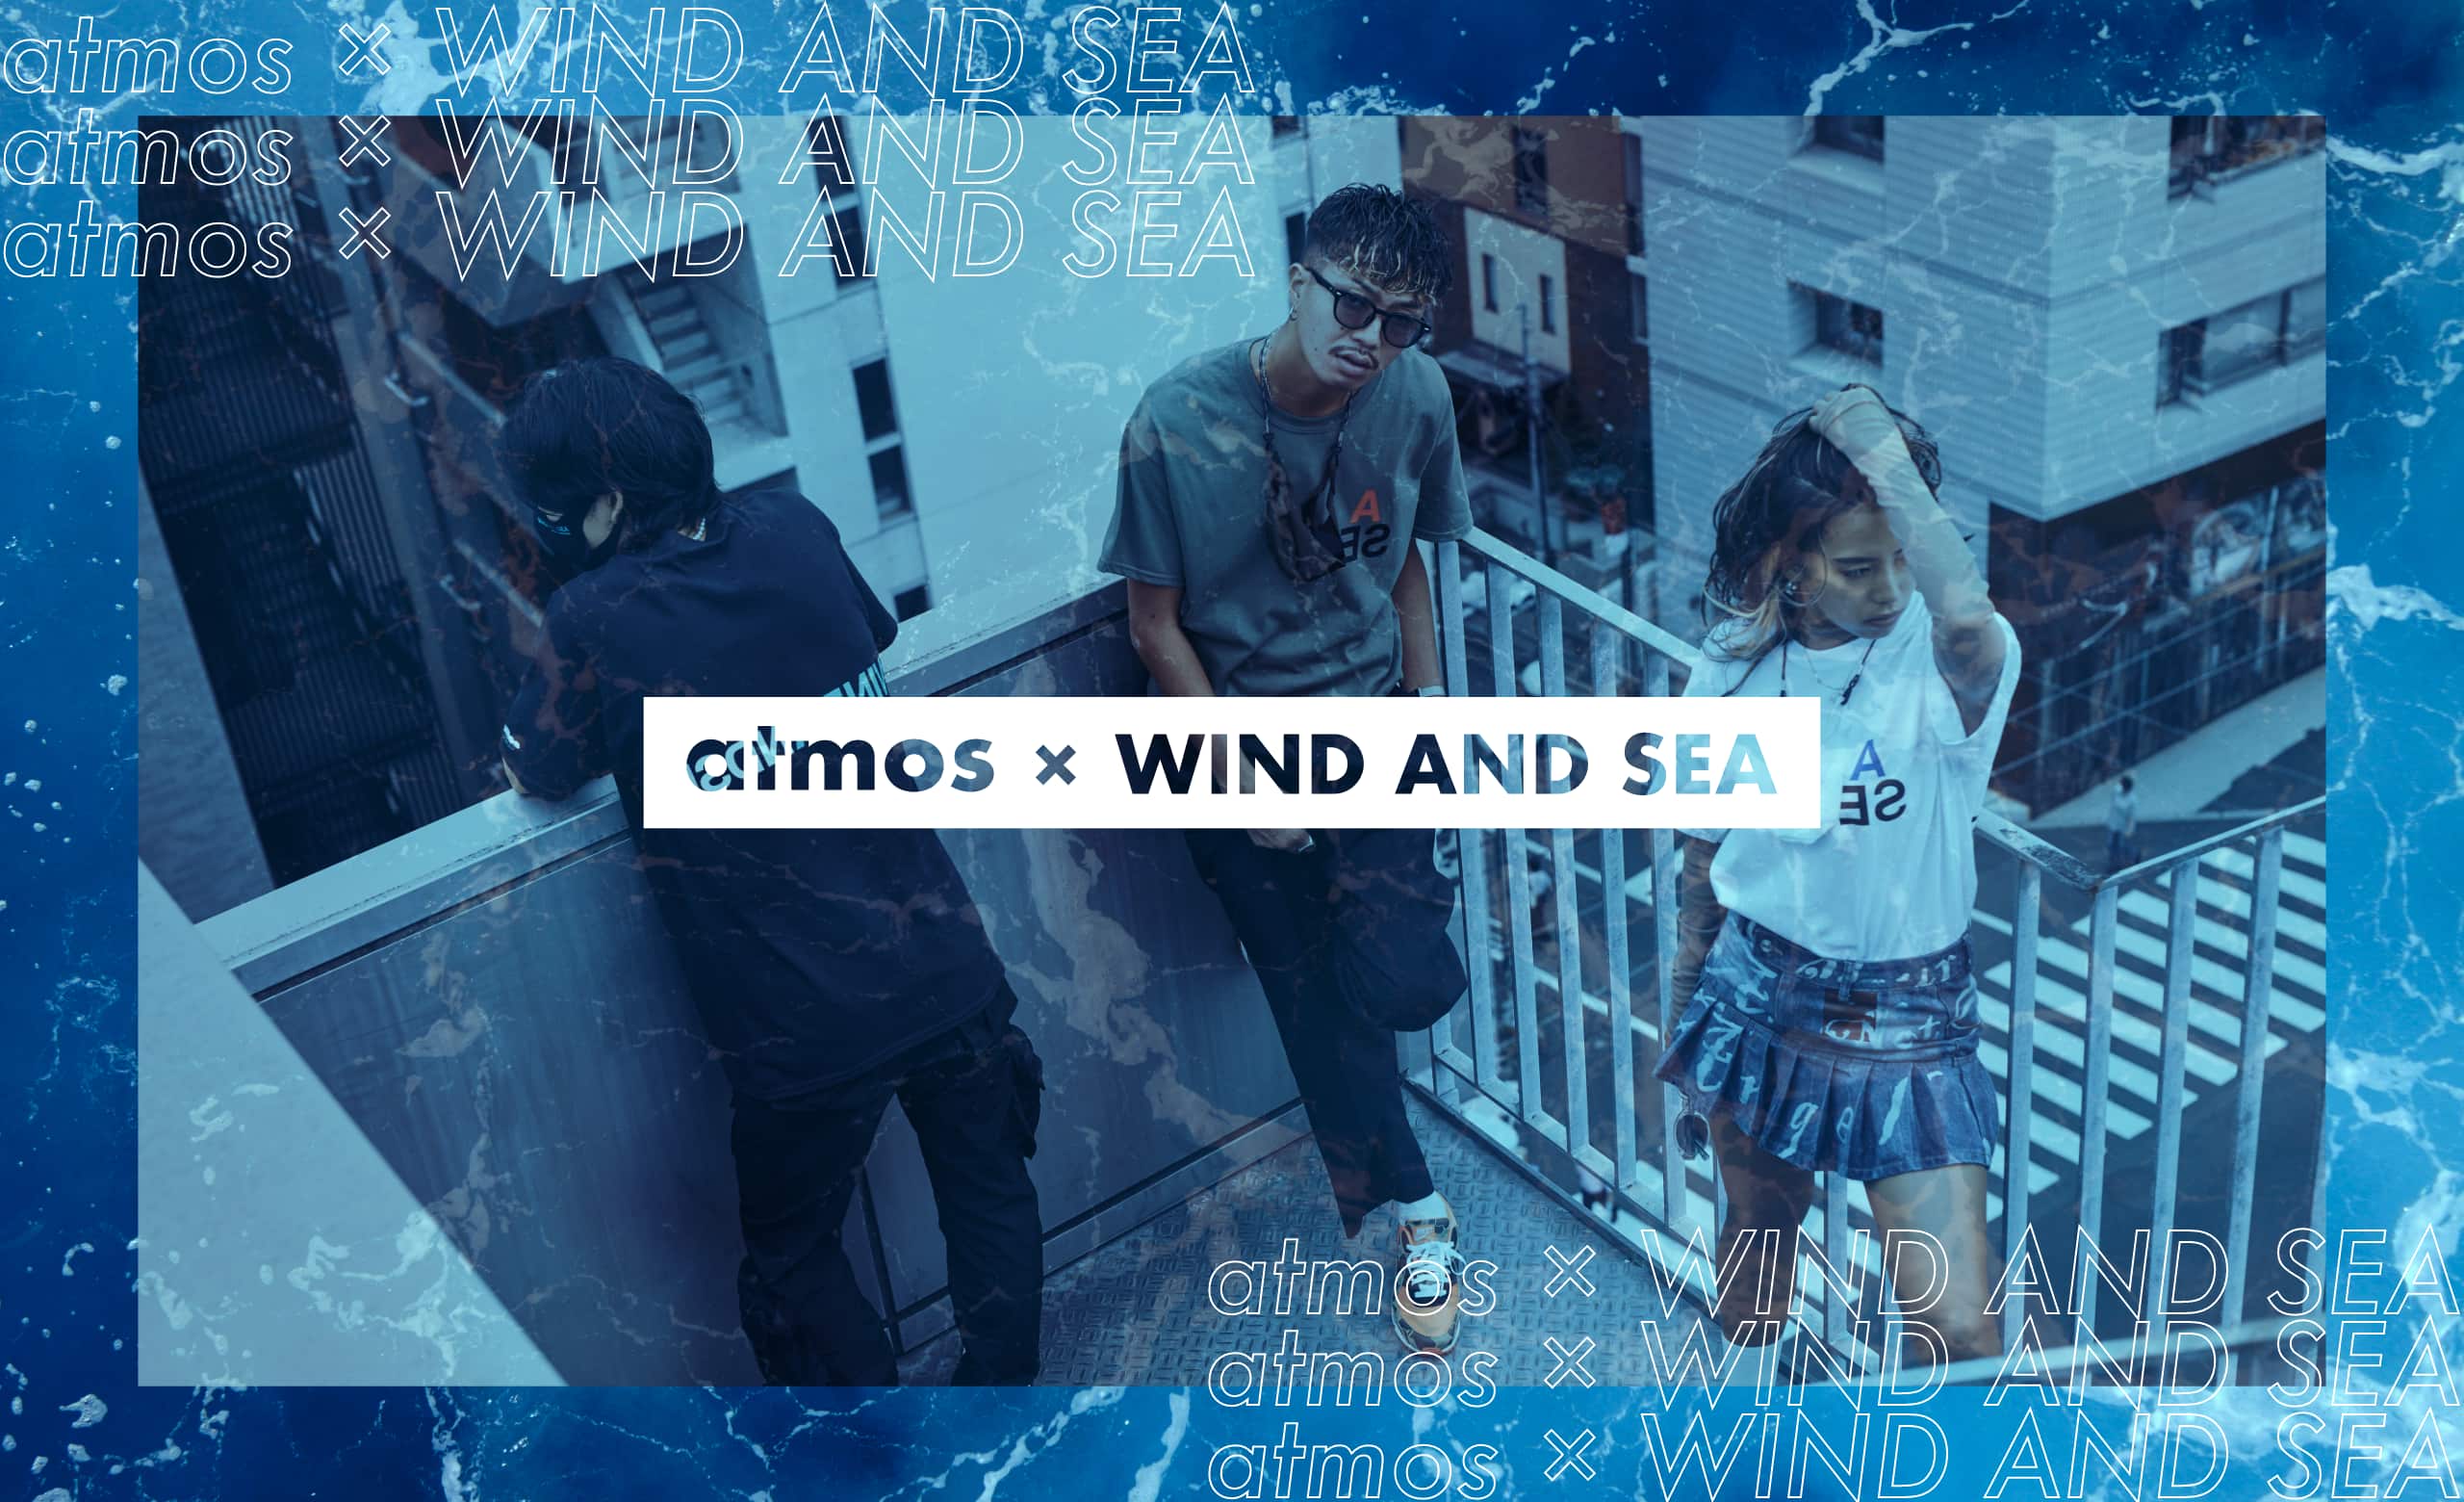 "atmos x WIND AND SEA"